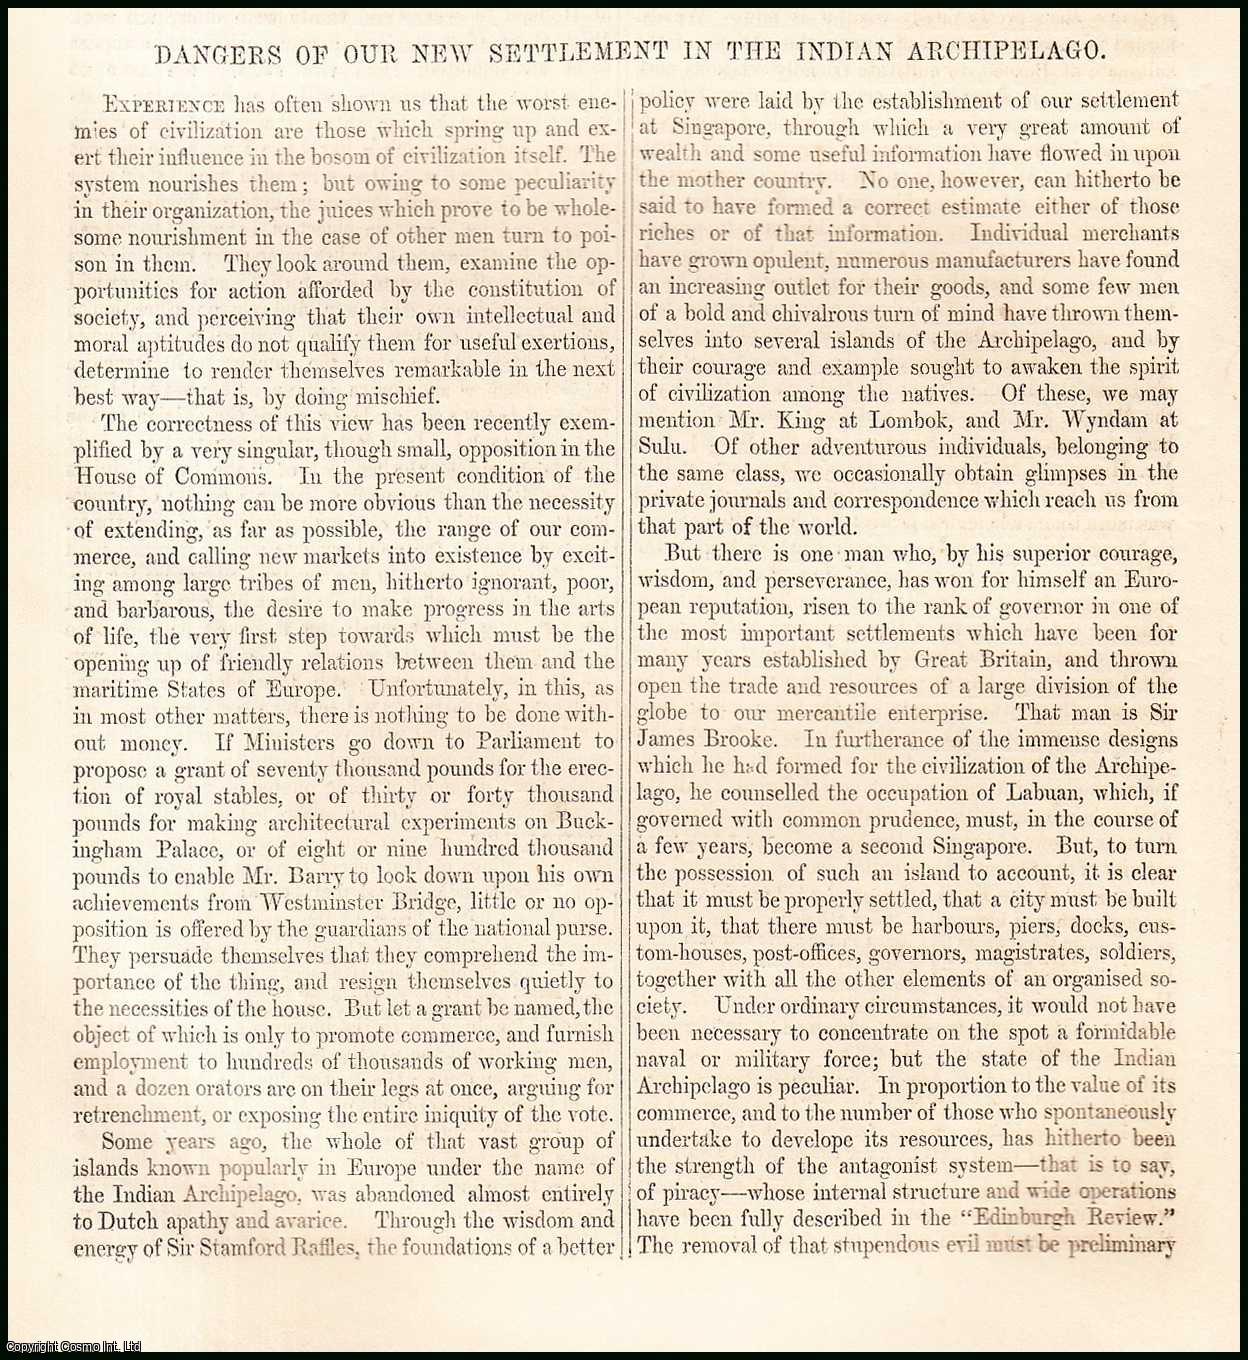 Horace S. R. St. John - Dangers of our New Settlement in the Indian Archipelago. An original article from Tait's Edinburgh Magazine, 1848.